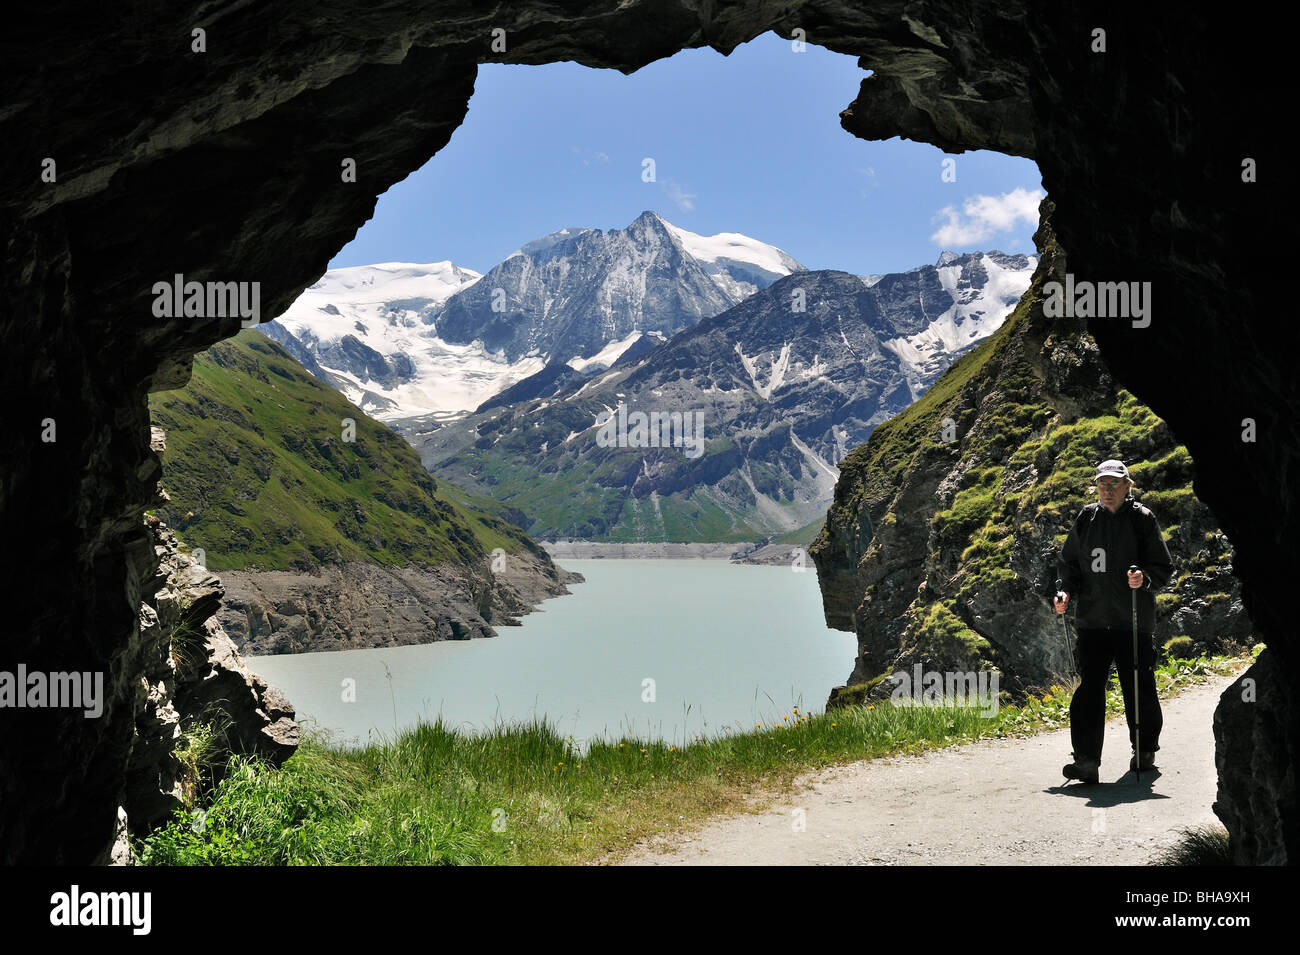 Tourist walking through cave along the Lac des Dix, formed by the Grande Dixence dam in Valais / Wallis, Swiss Alps, Switzerland Stock Photo